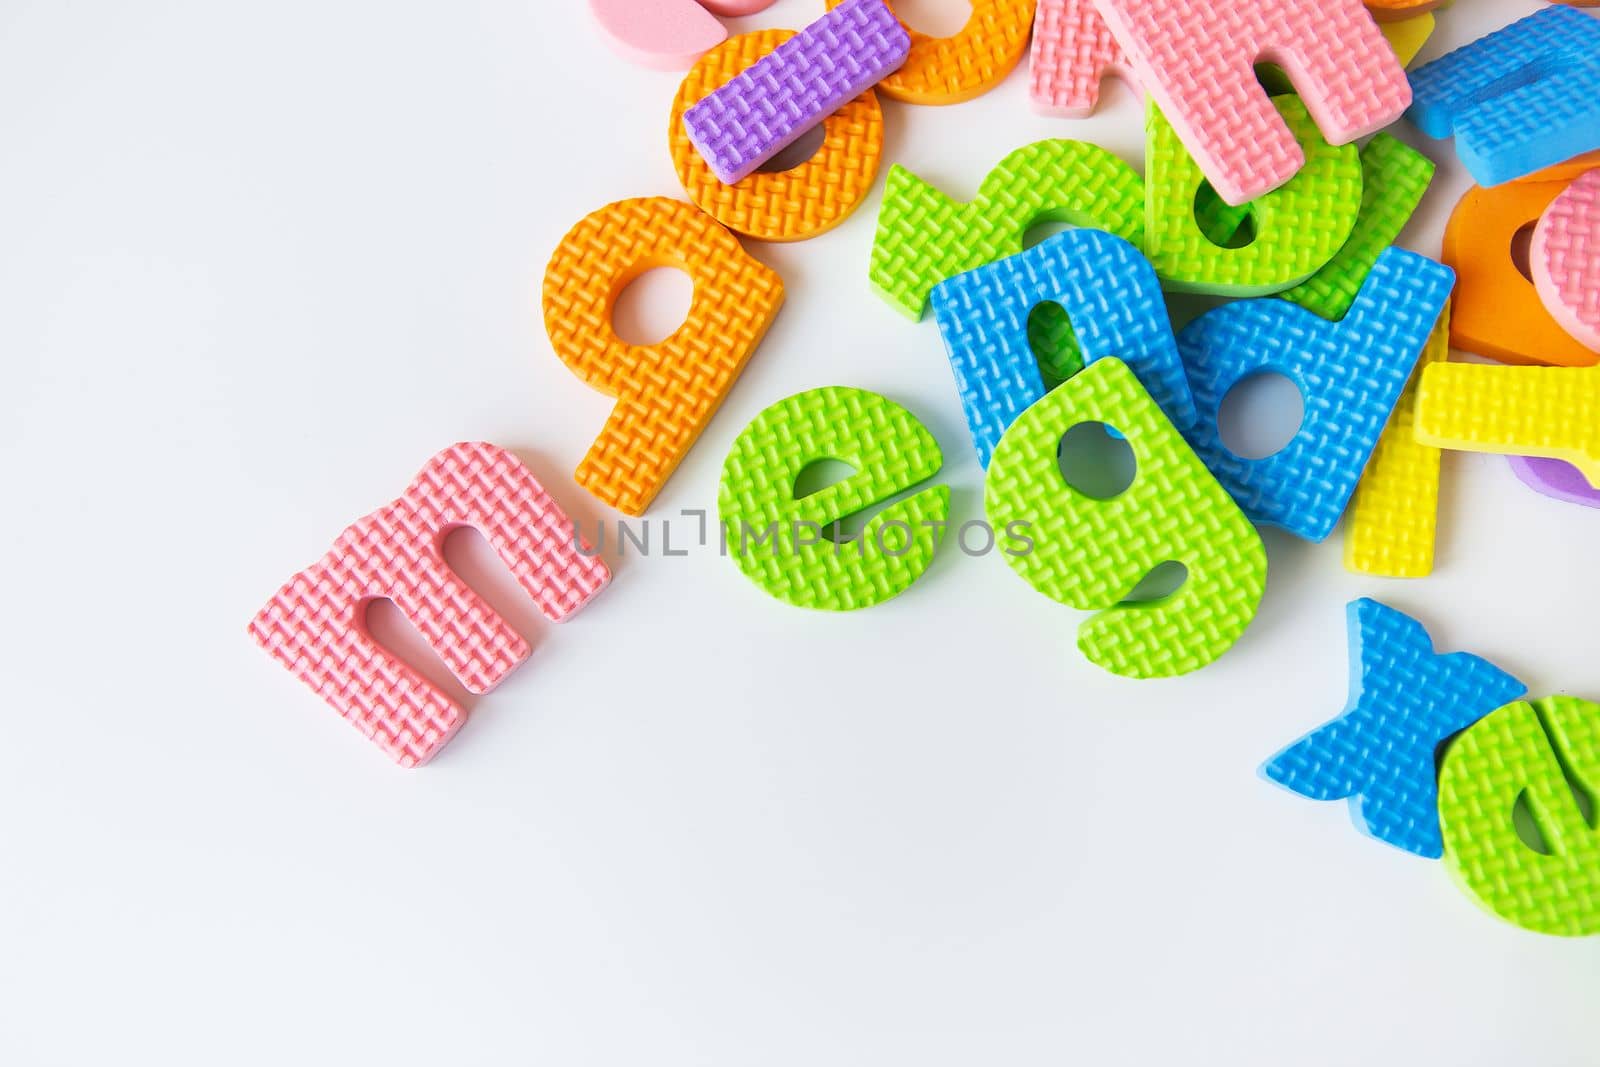 Multicolored letters. Letters for the study of children in kindergarten or school, fluted letters, tactile letters